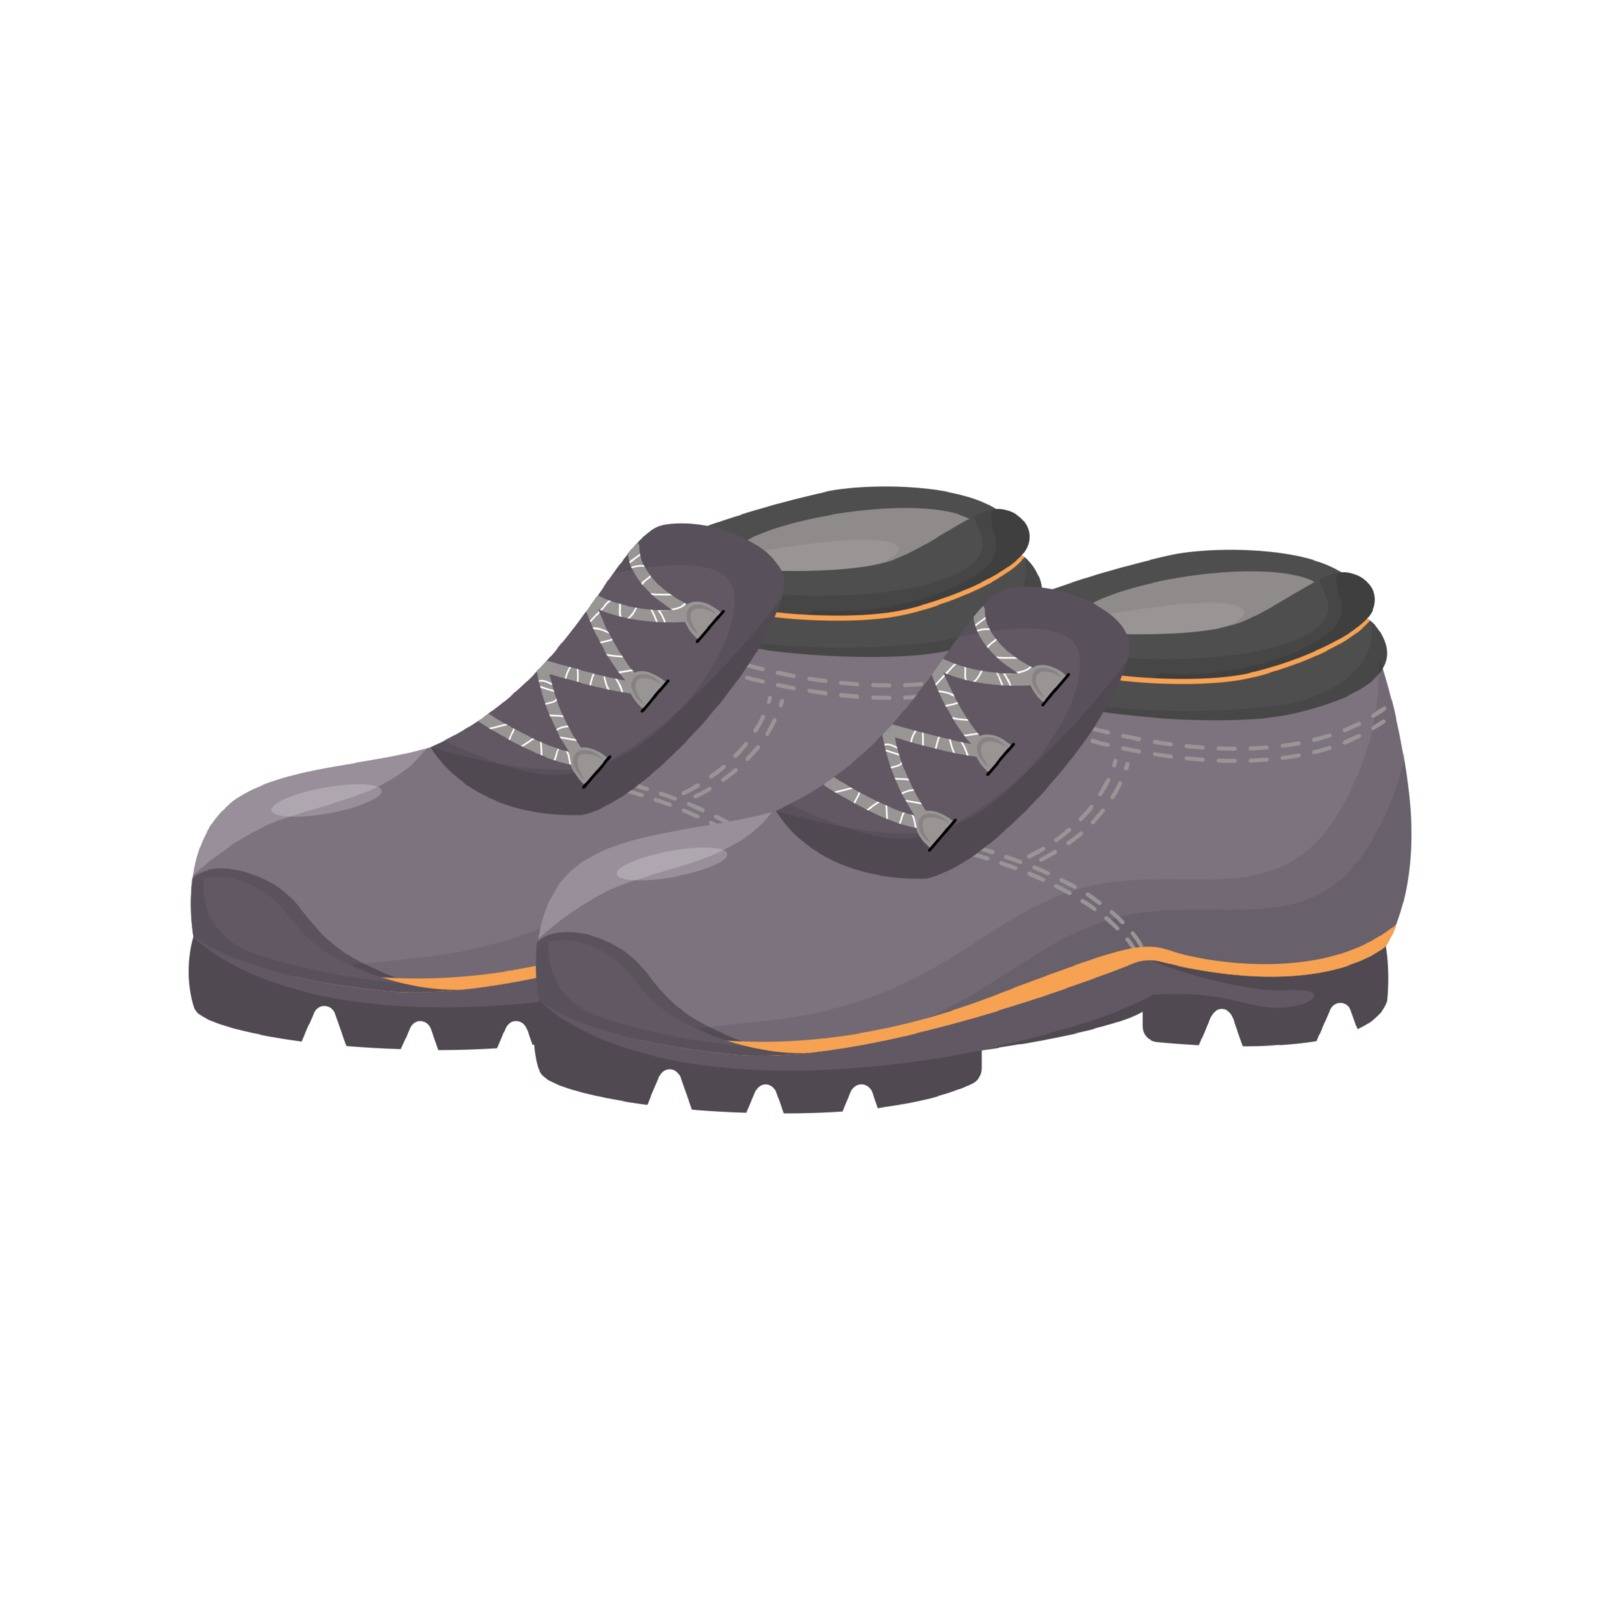 Rubber shoes, galoshes cartoon vector illustration by ntl